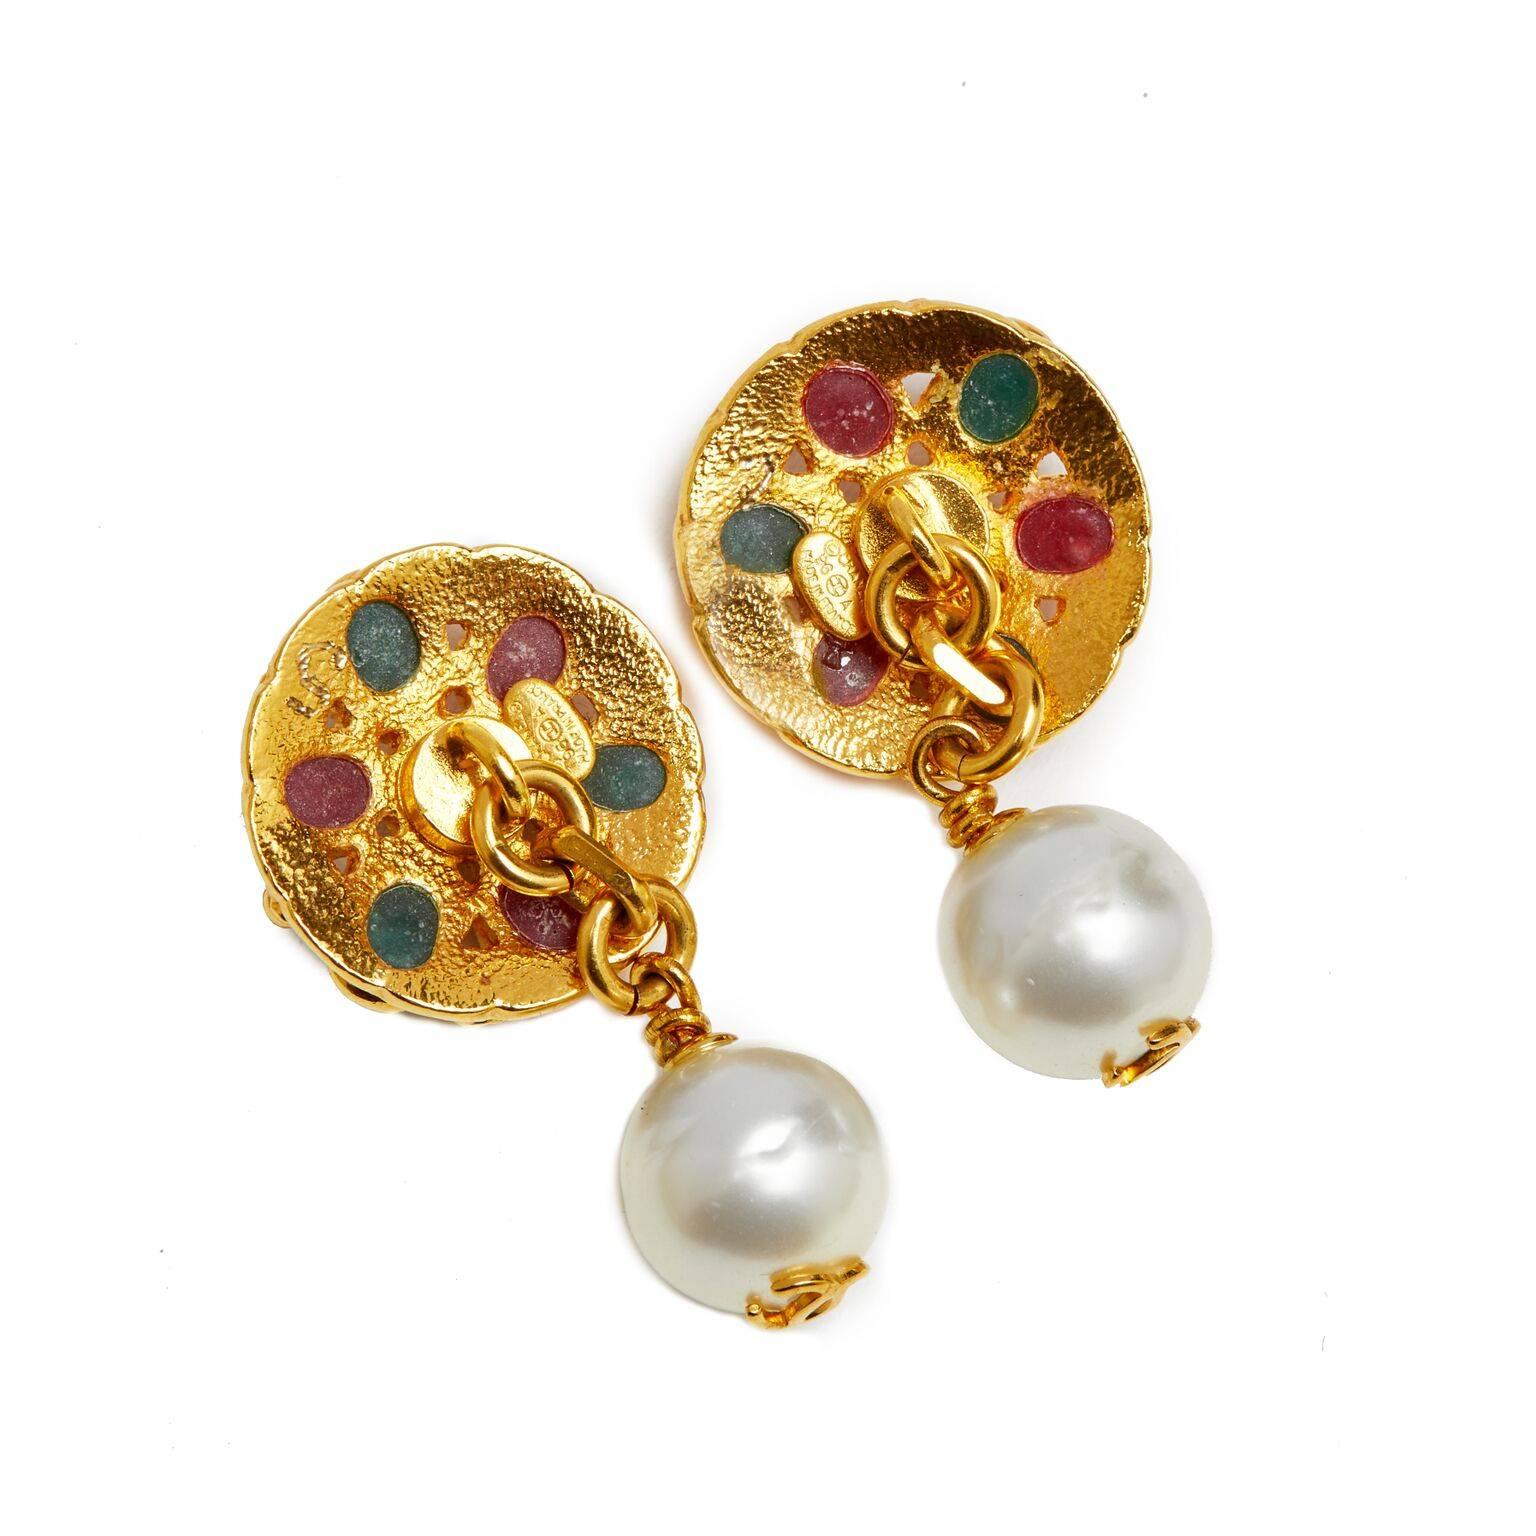 These exquisite and rare Maison Gripoix for Chanel cufflinks are in beautiful condition. Gold gilt disks decorated with poured glass cabochons in red, green and burgundy each linked to round pearlescent beads emblazoned with the iconic CC motif. The